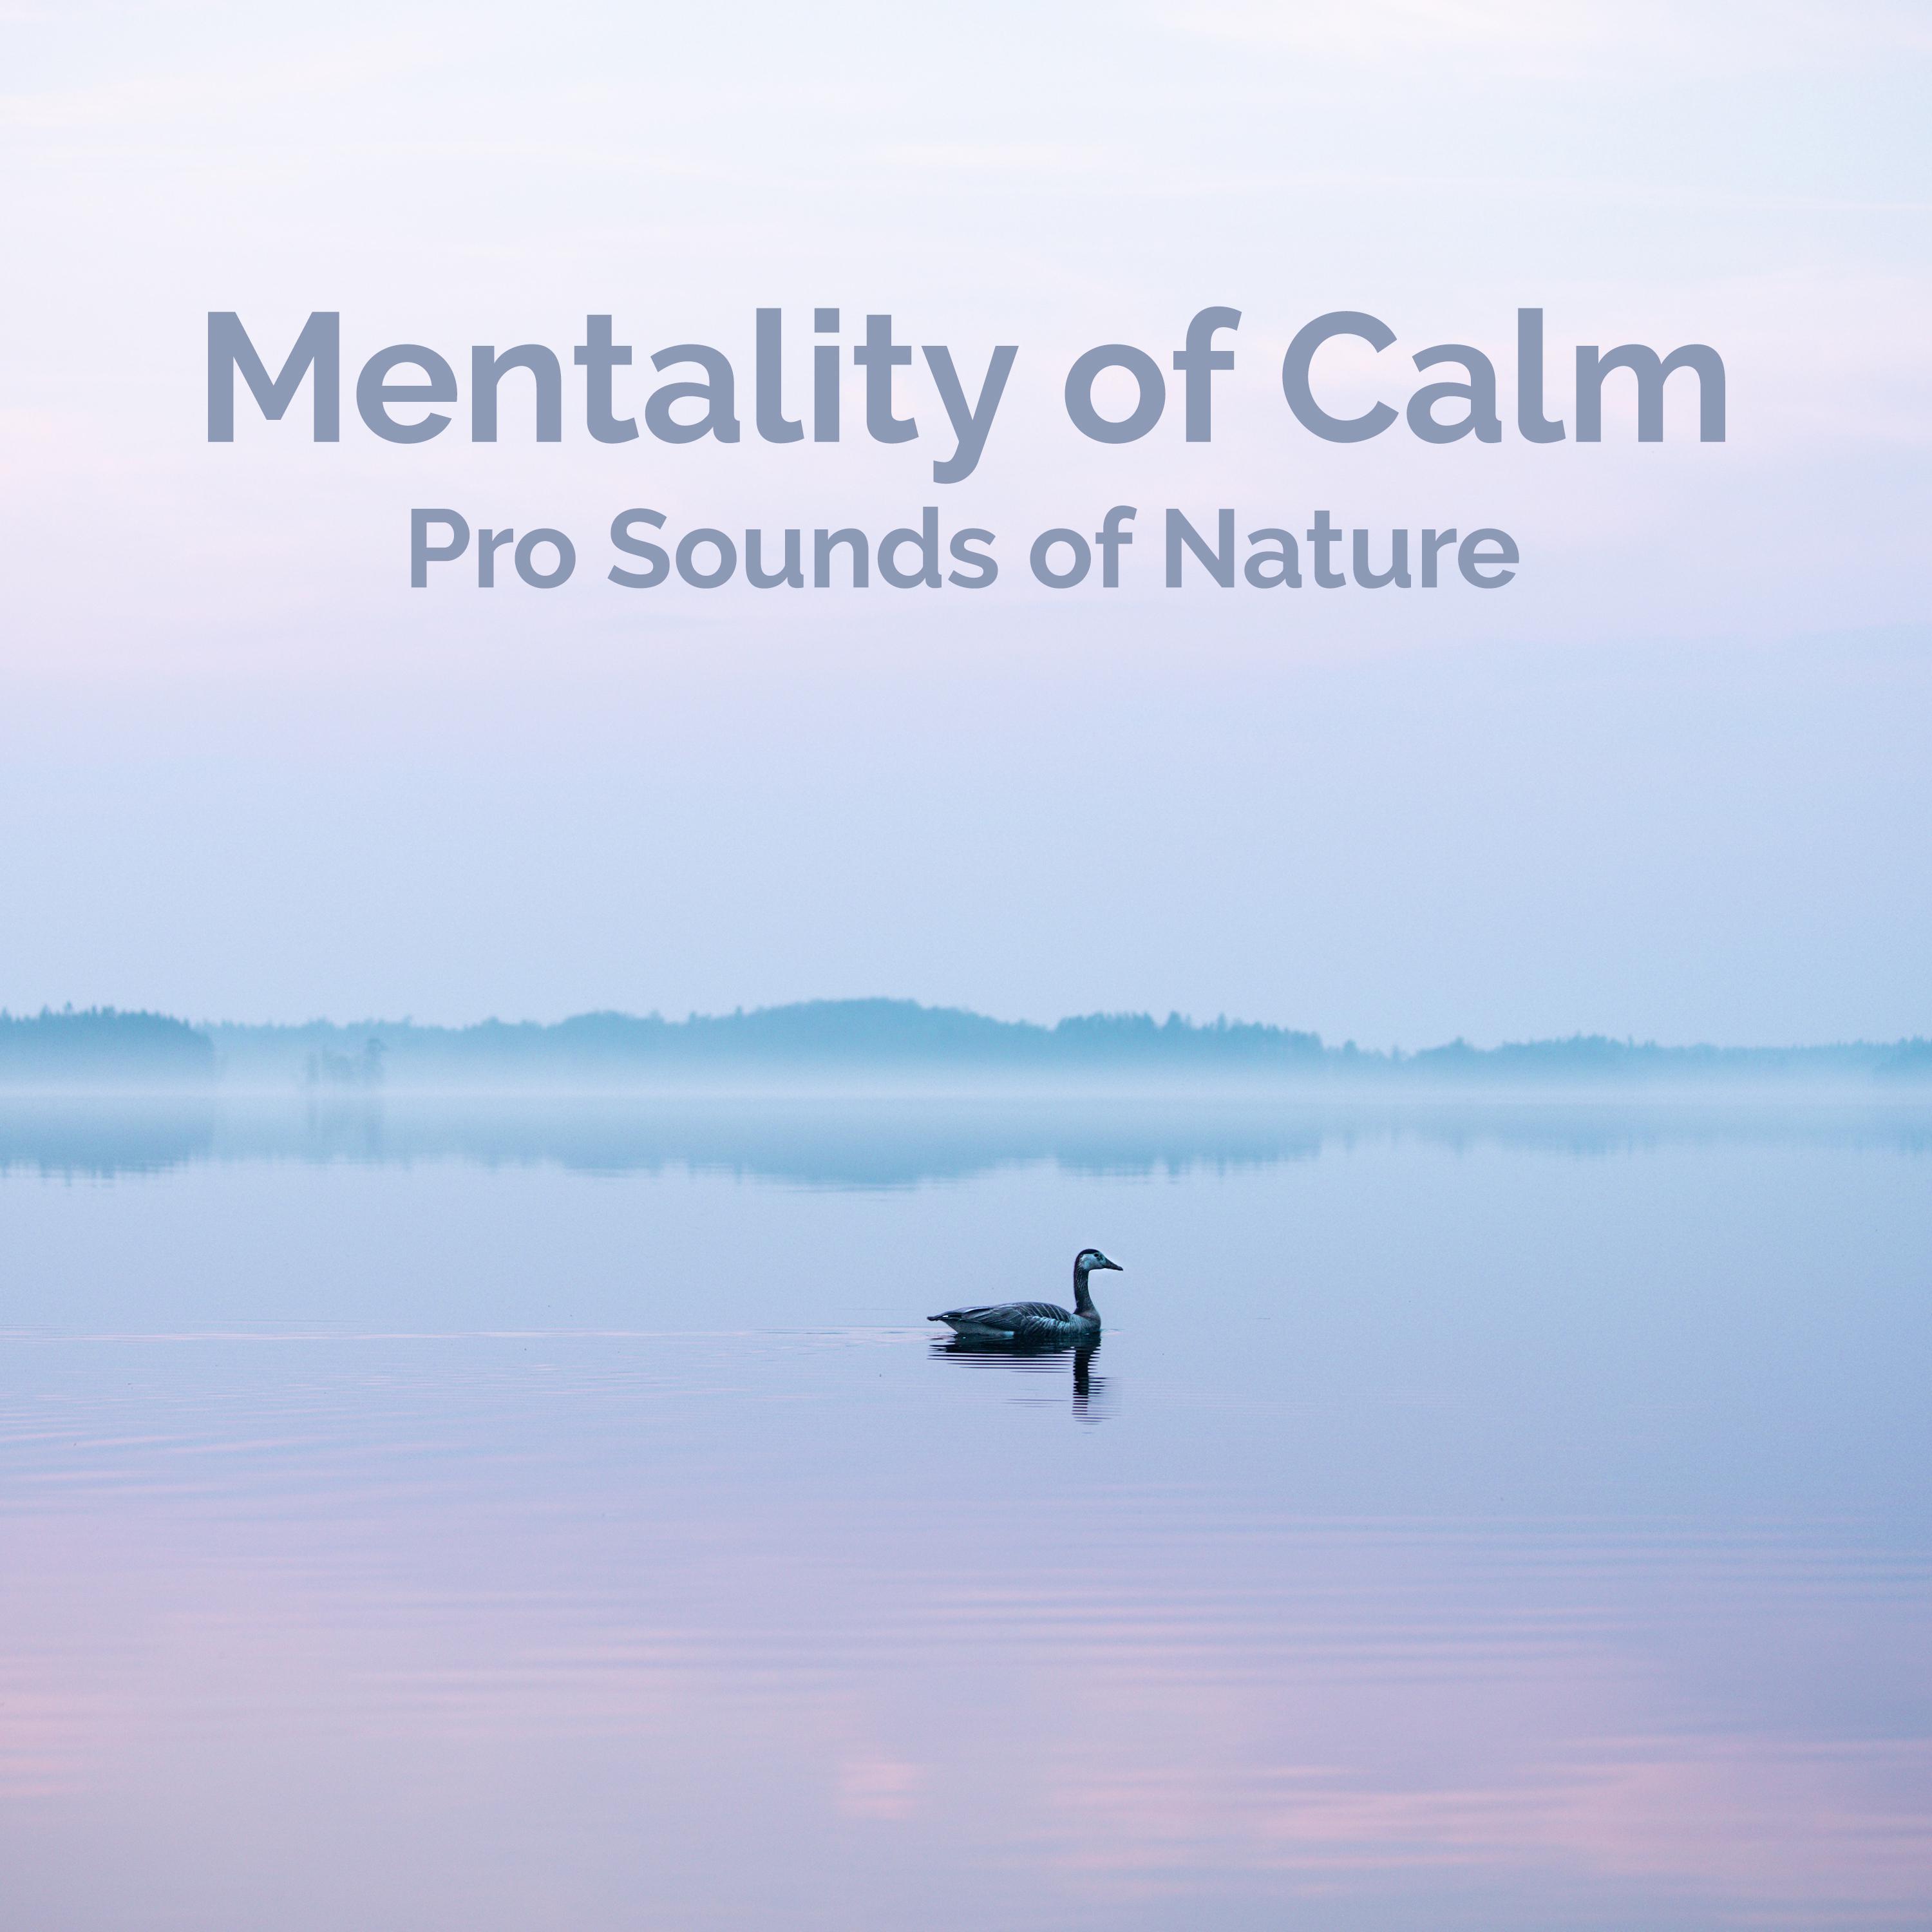 Mentality of Calm